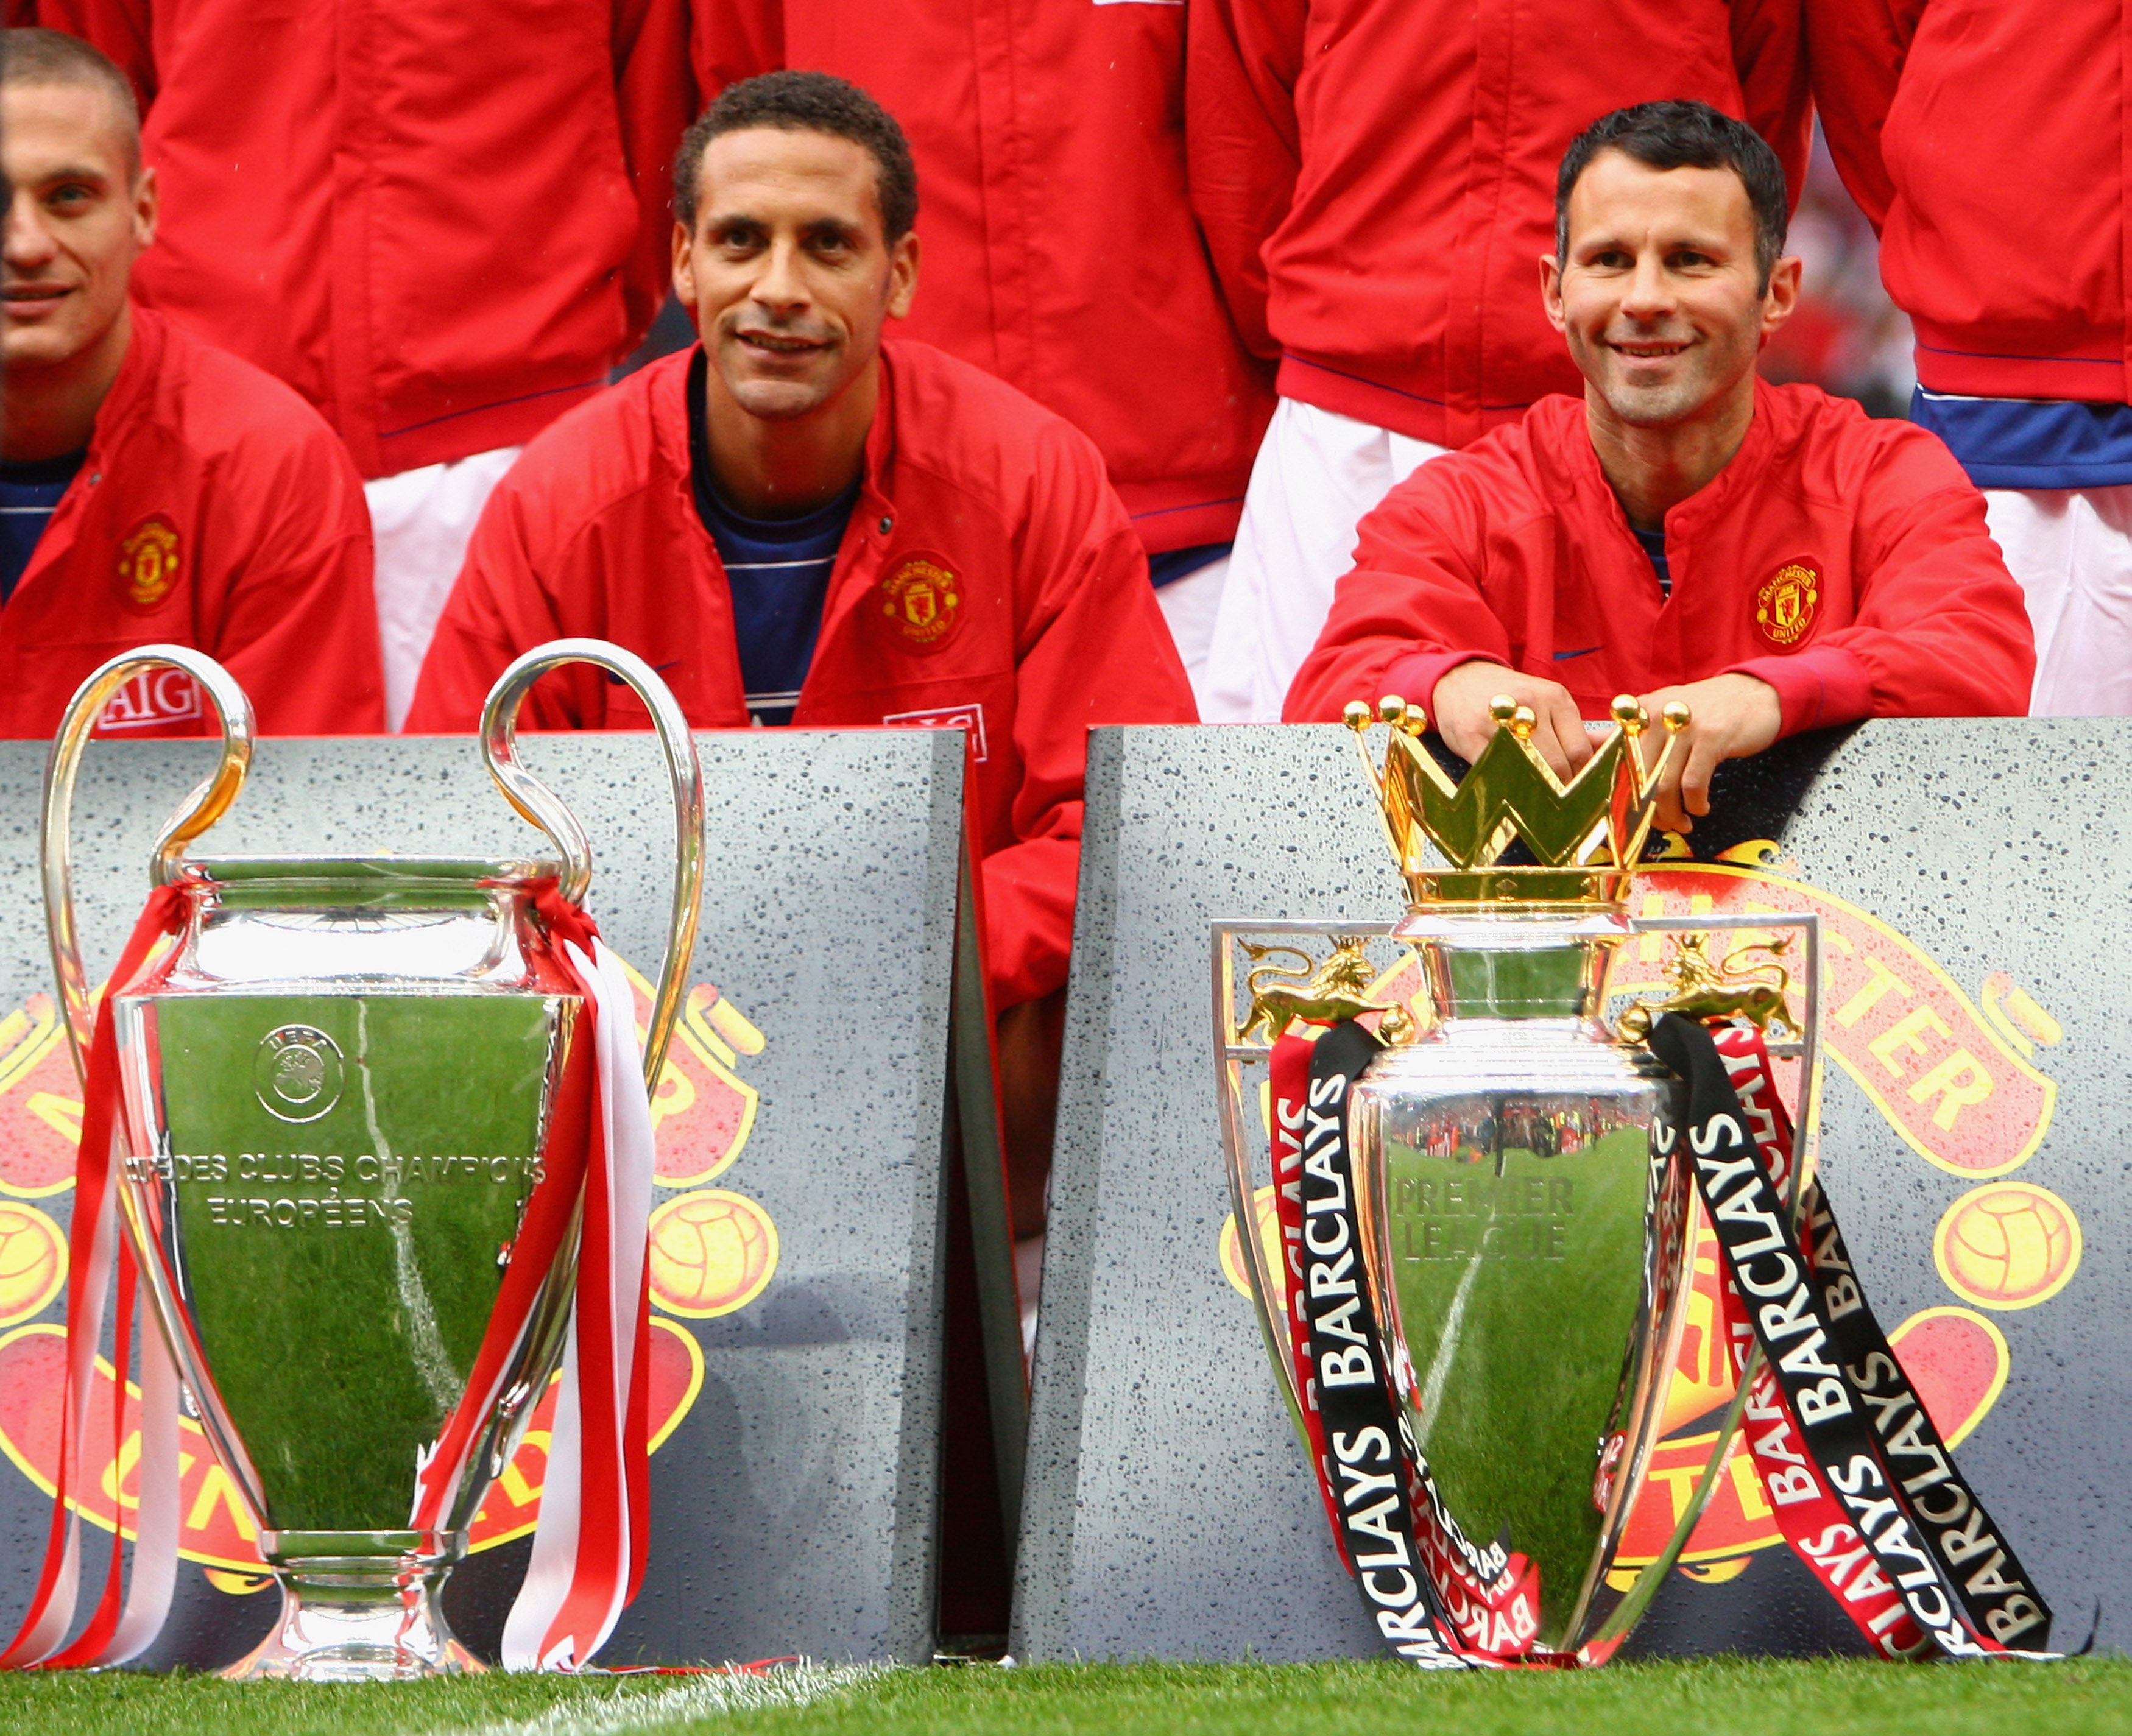 MANCHESTER, UNITED KINGDOM - AUGUST 06:  Rio Ferdinand of Manchester United and team mate Ryan Giggs (R) pose with the Premier League and Champions League trophies prior to the Pre Season Friendly match between Manchester United and Juventus at Old Traffo